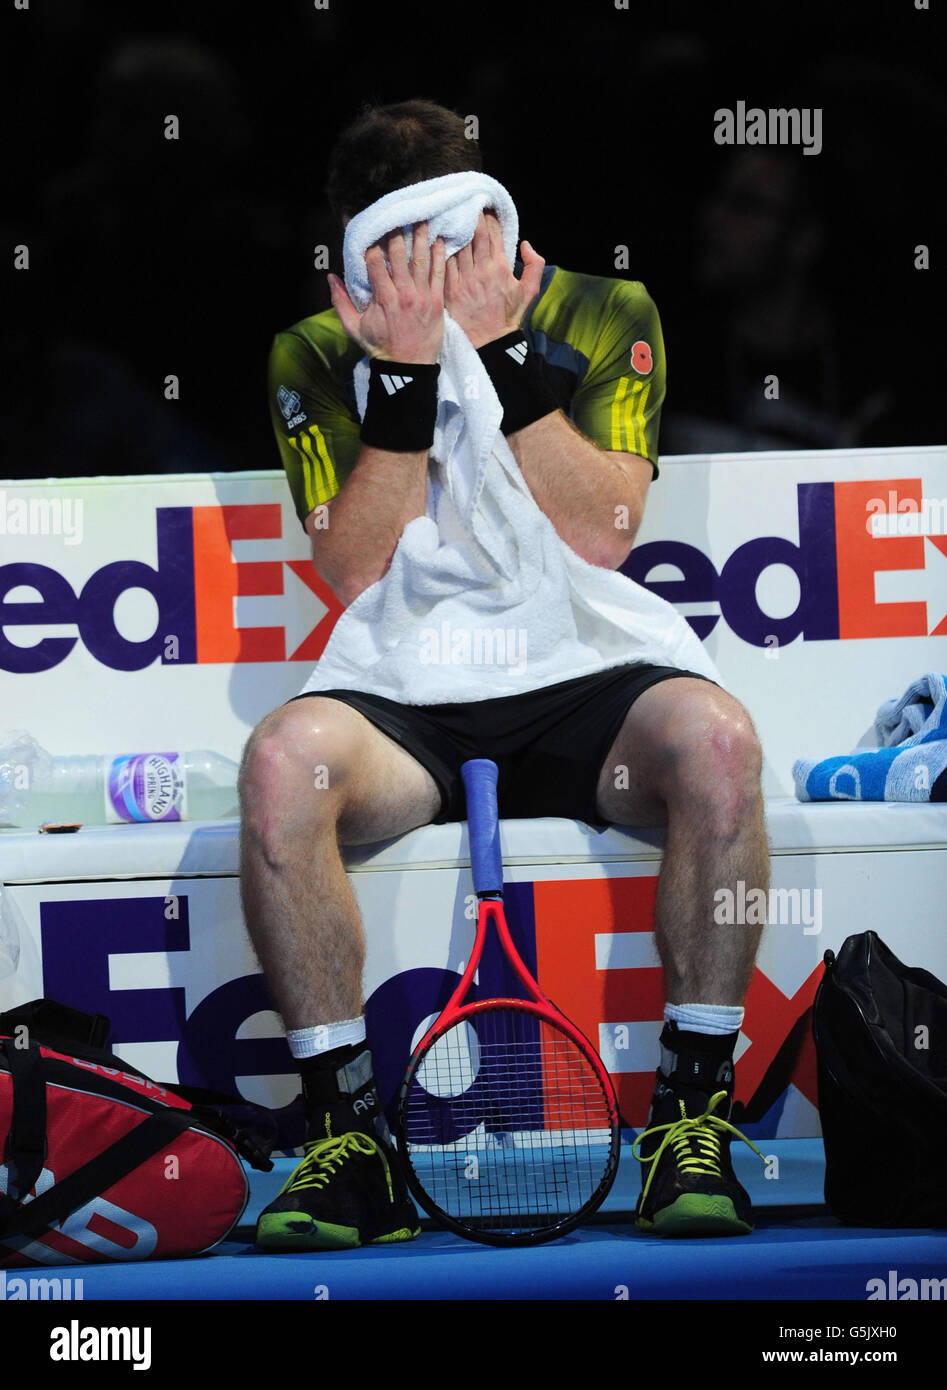 Great Britain's Andy Murray sits dejected after losing the first set to Switzerland's Roger Federer during the Barclays ATP World Tour Finals at the O2 Arena, London. Stock Photo